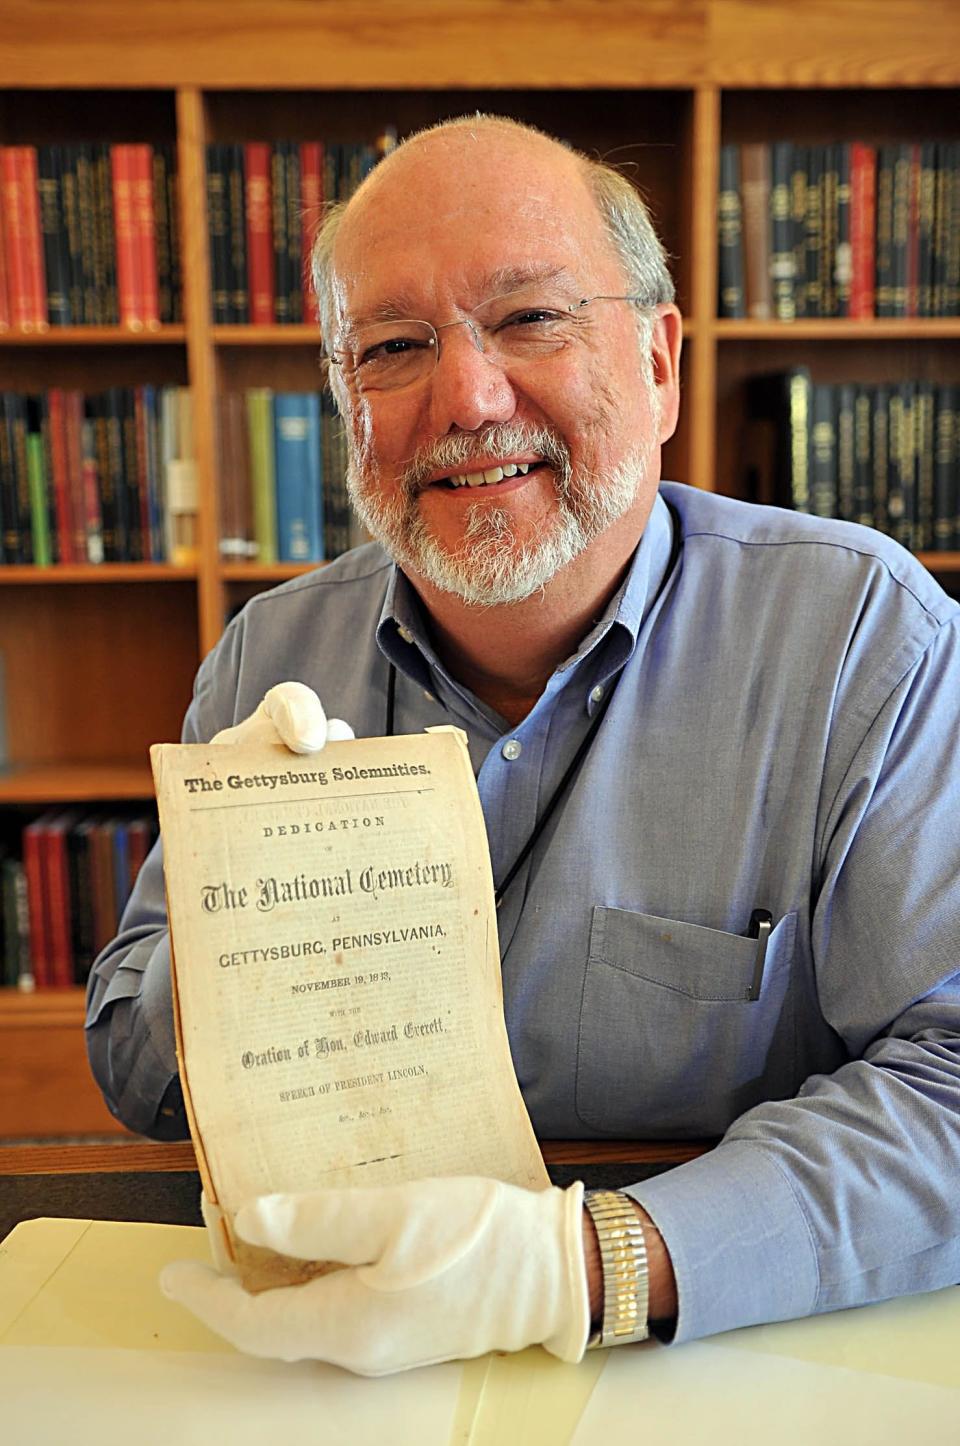 Steve Cotham pictured with an original first printing of the Gettysburg Address.